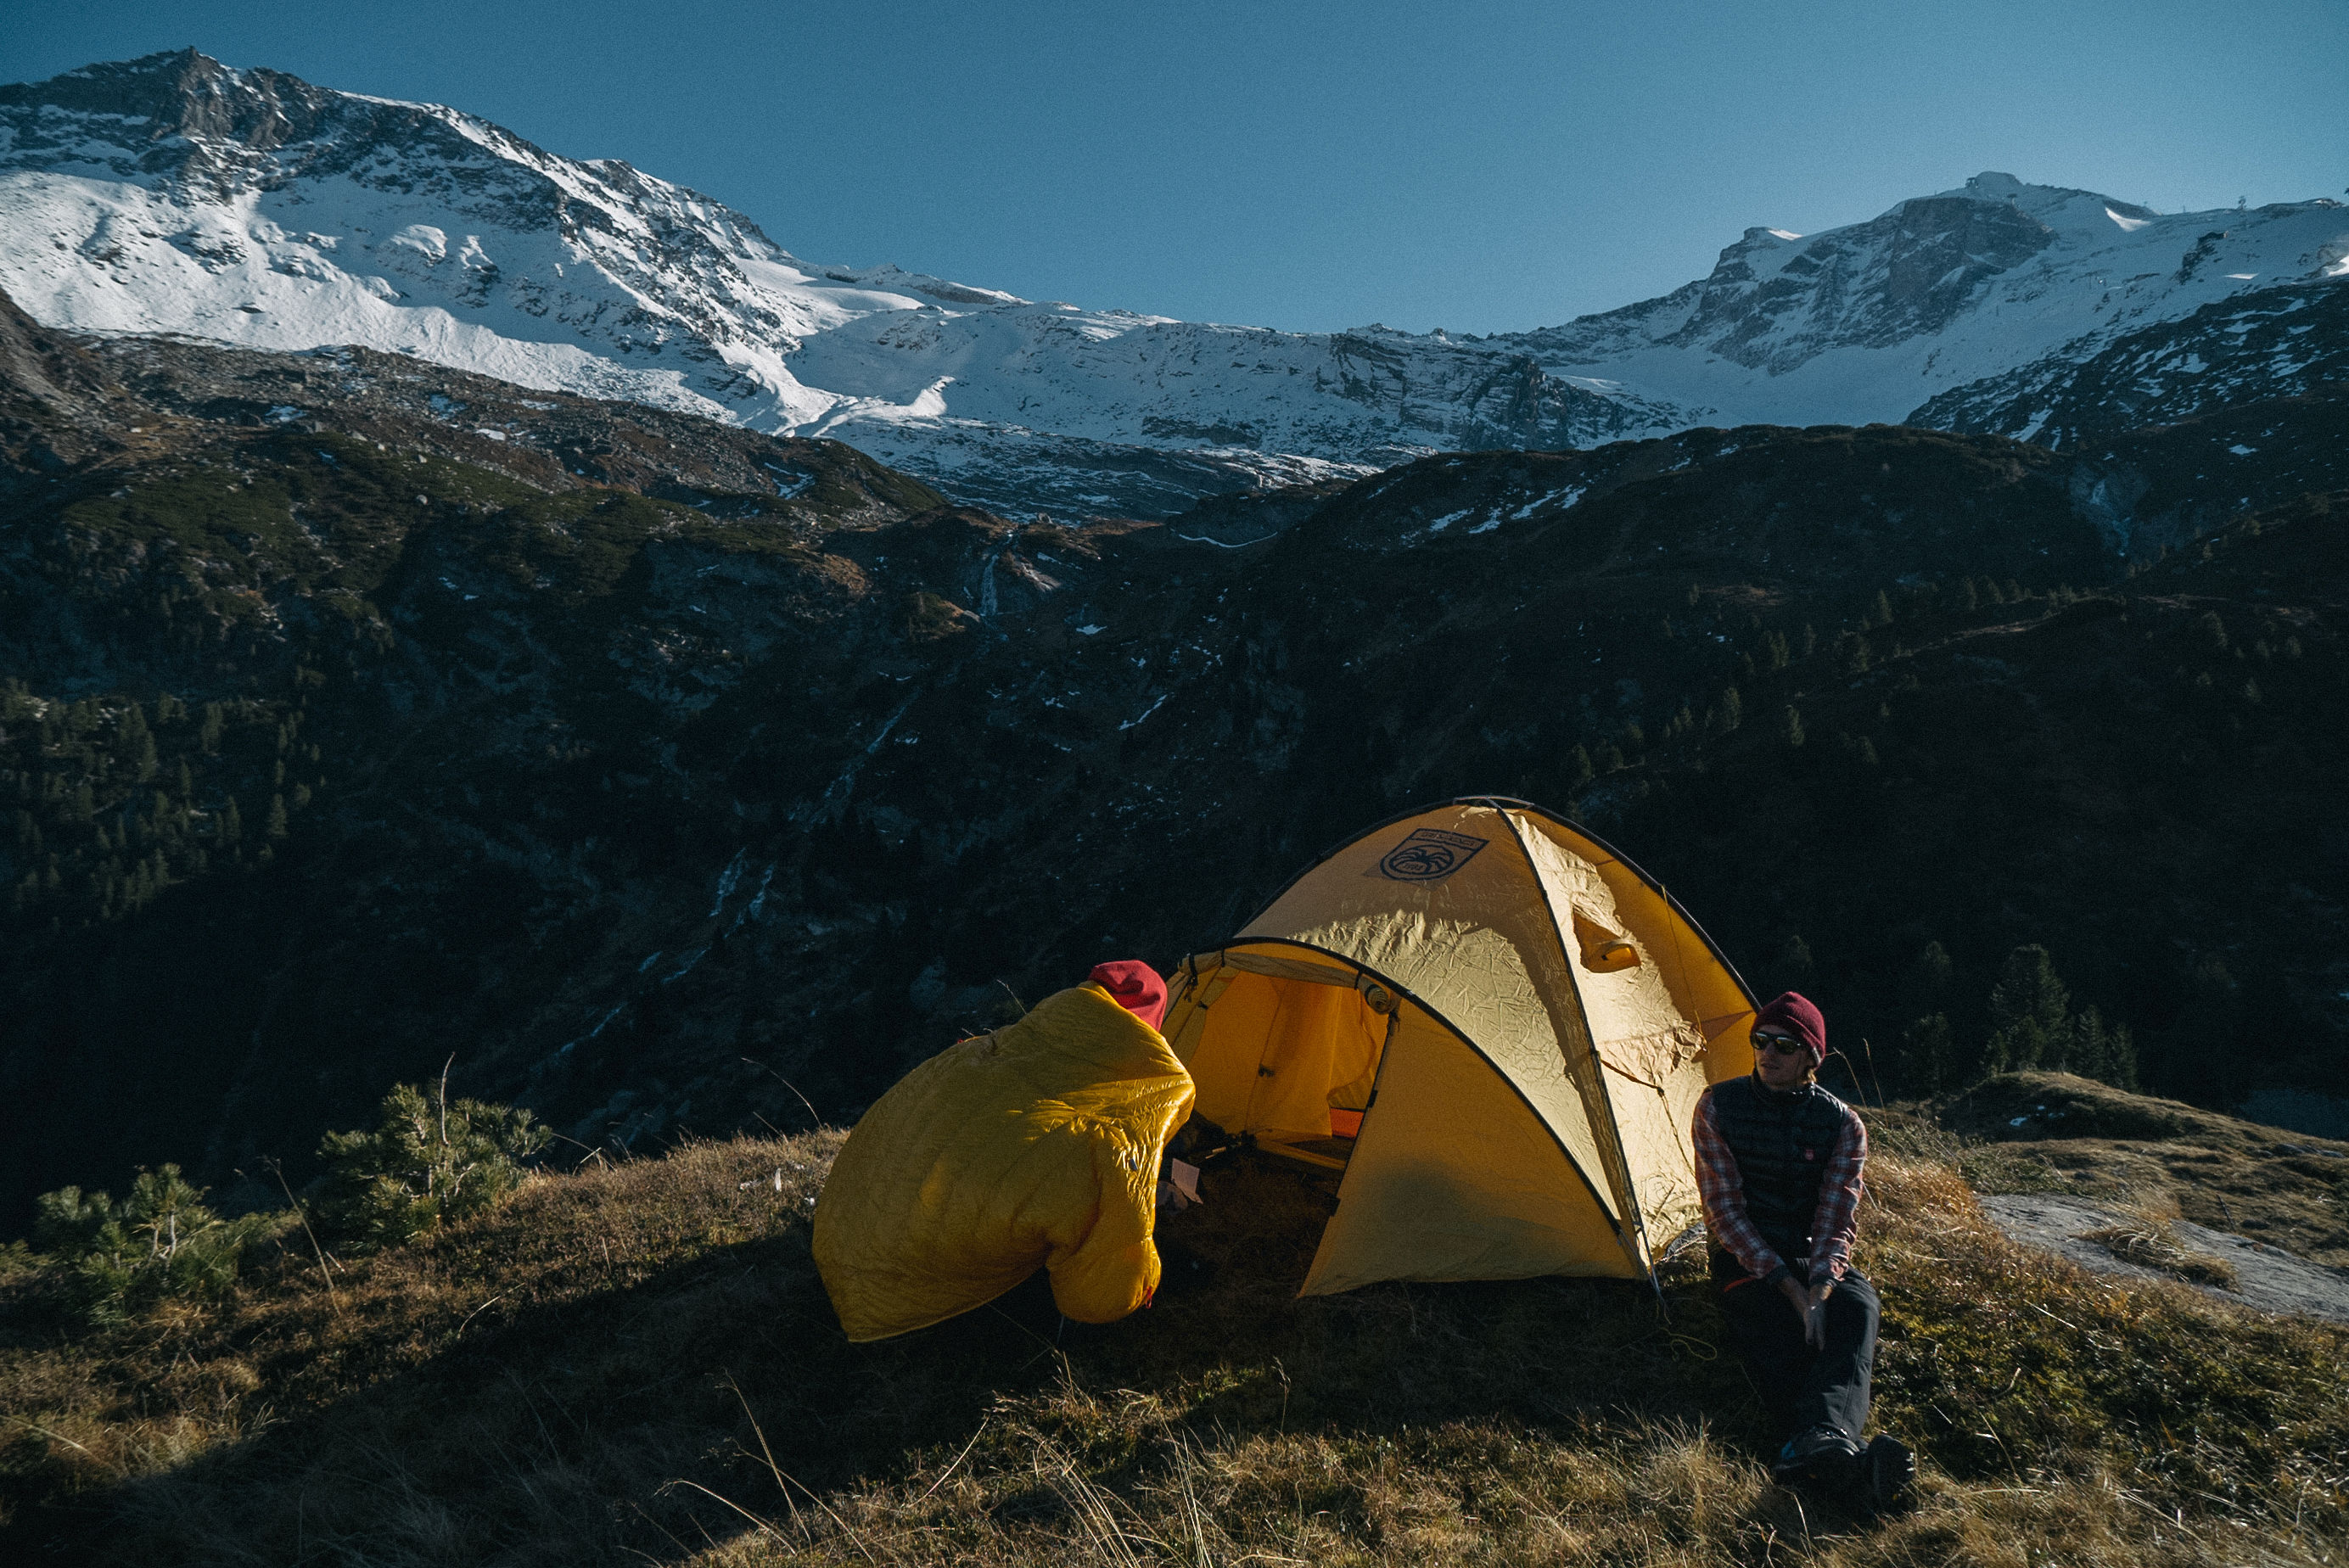 WHICH SLEEPING BAG WILL WORK BEST IN A TENT?